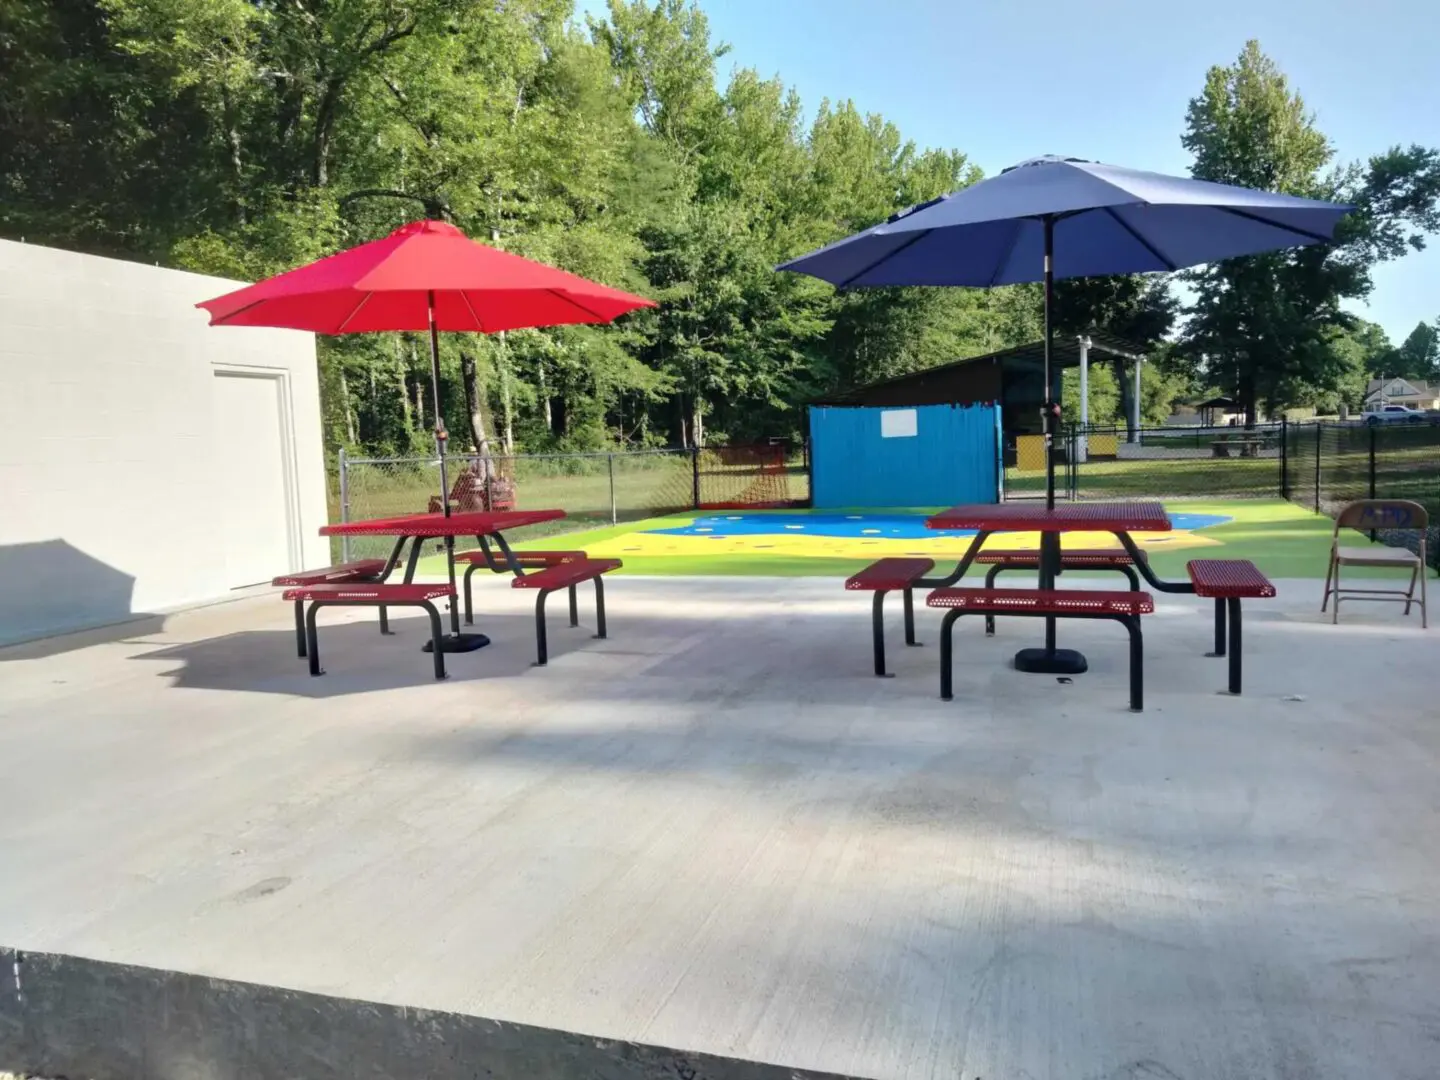 A picnic table with two umbrellas and one bench.